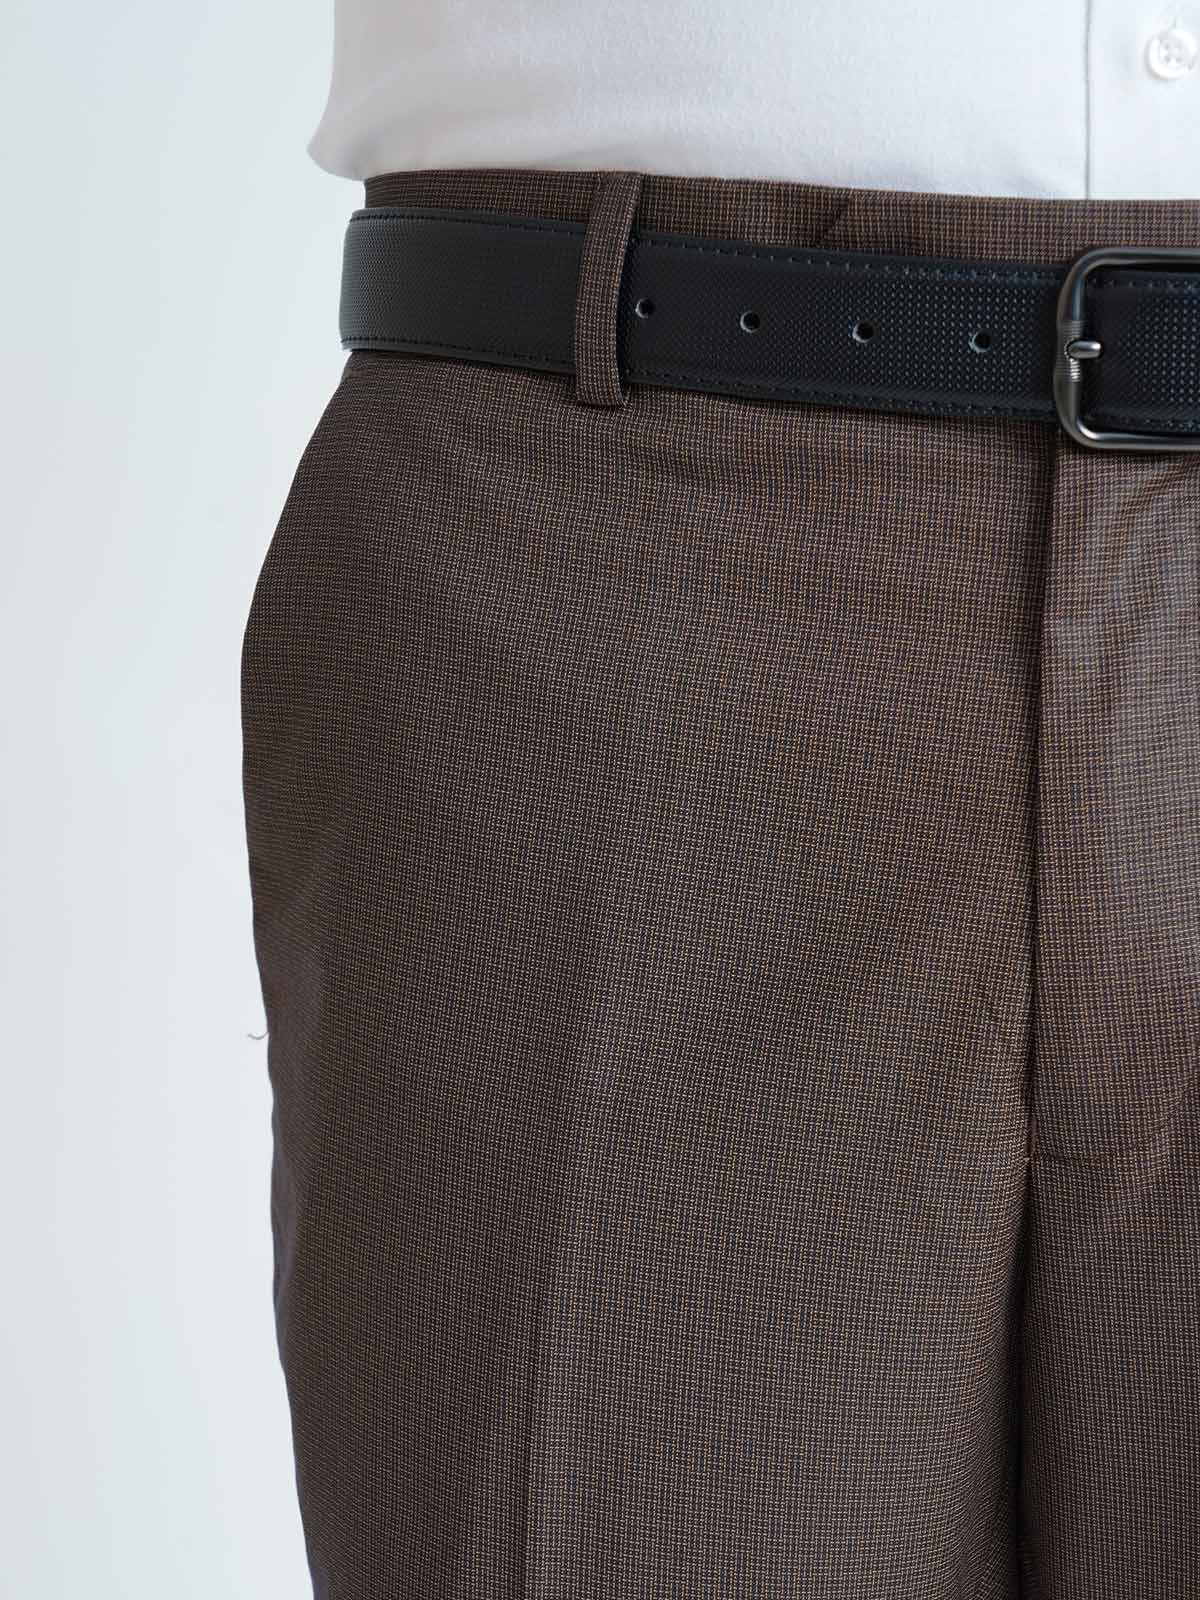 Mid Brown Self Executive Formal Dress Trouser (FDT-115)